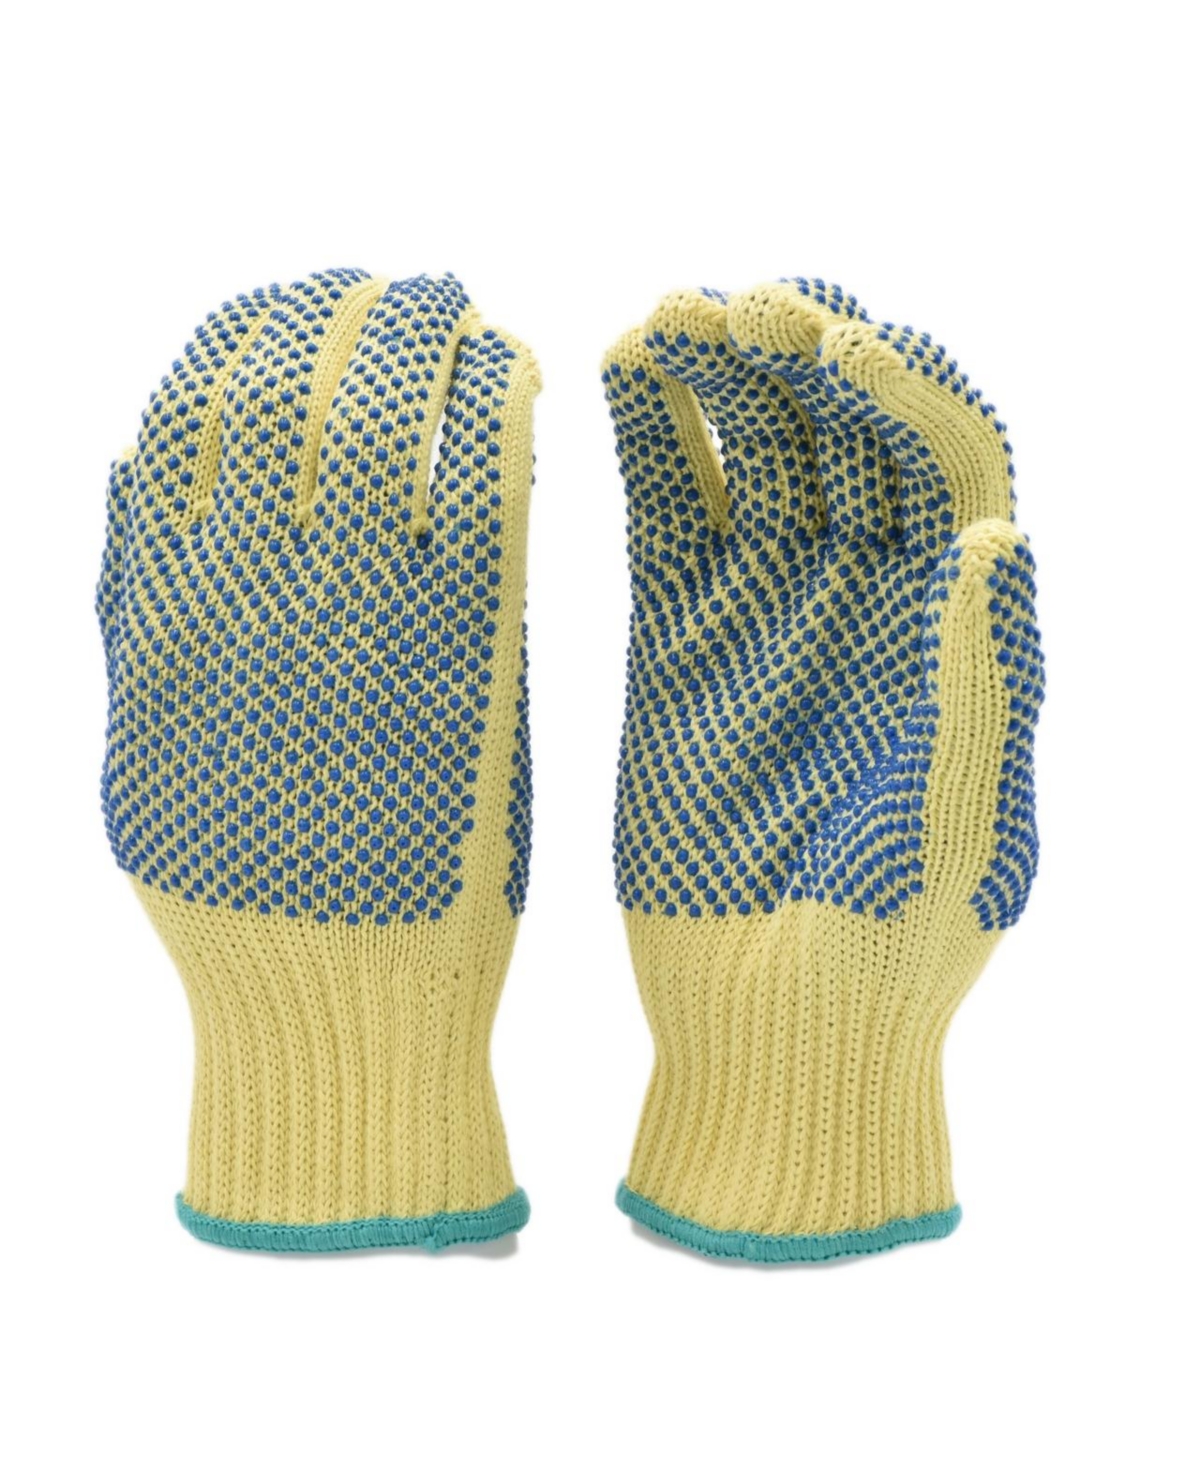 Pvc Dotted Knit Cut Resistant Work Gloves - Blue